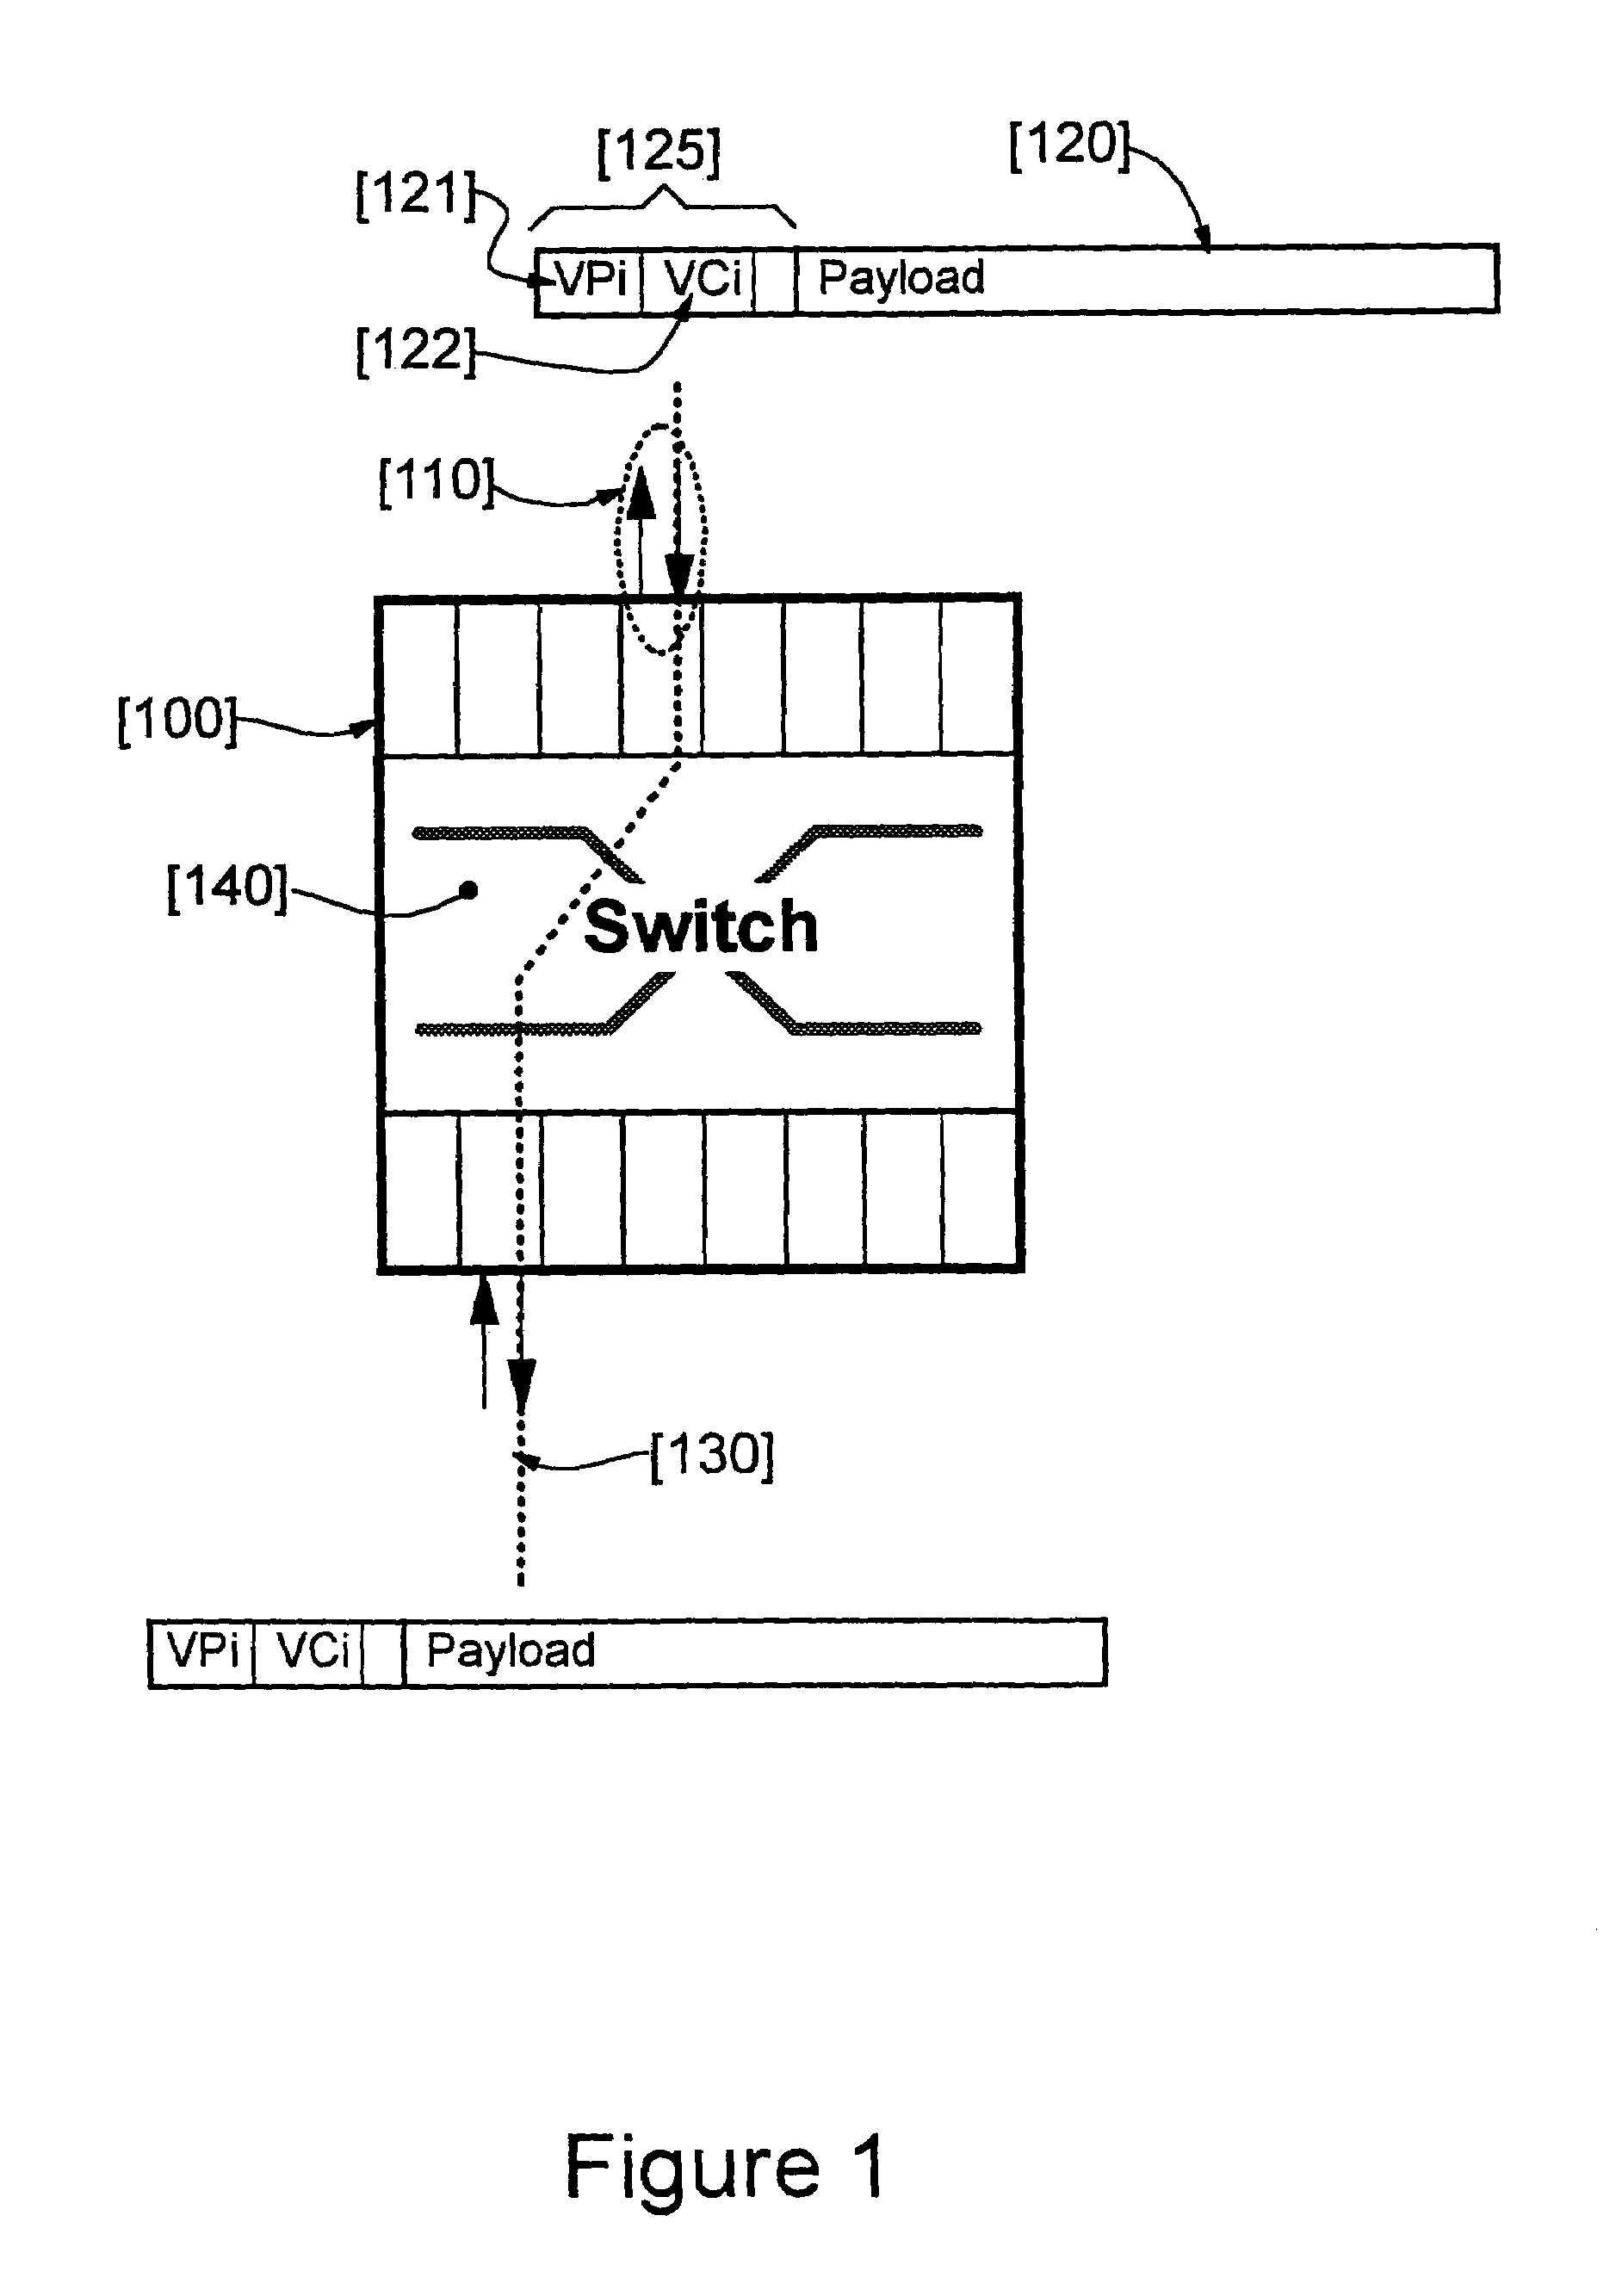 System and method for enabling remote surveillance of ATM network switching node ports